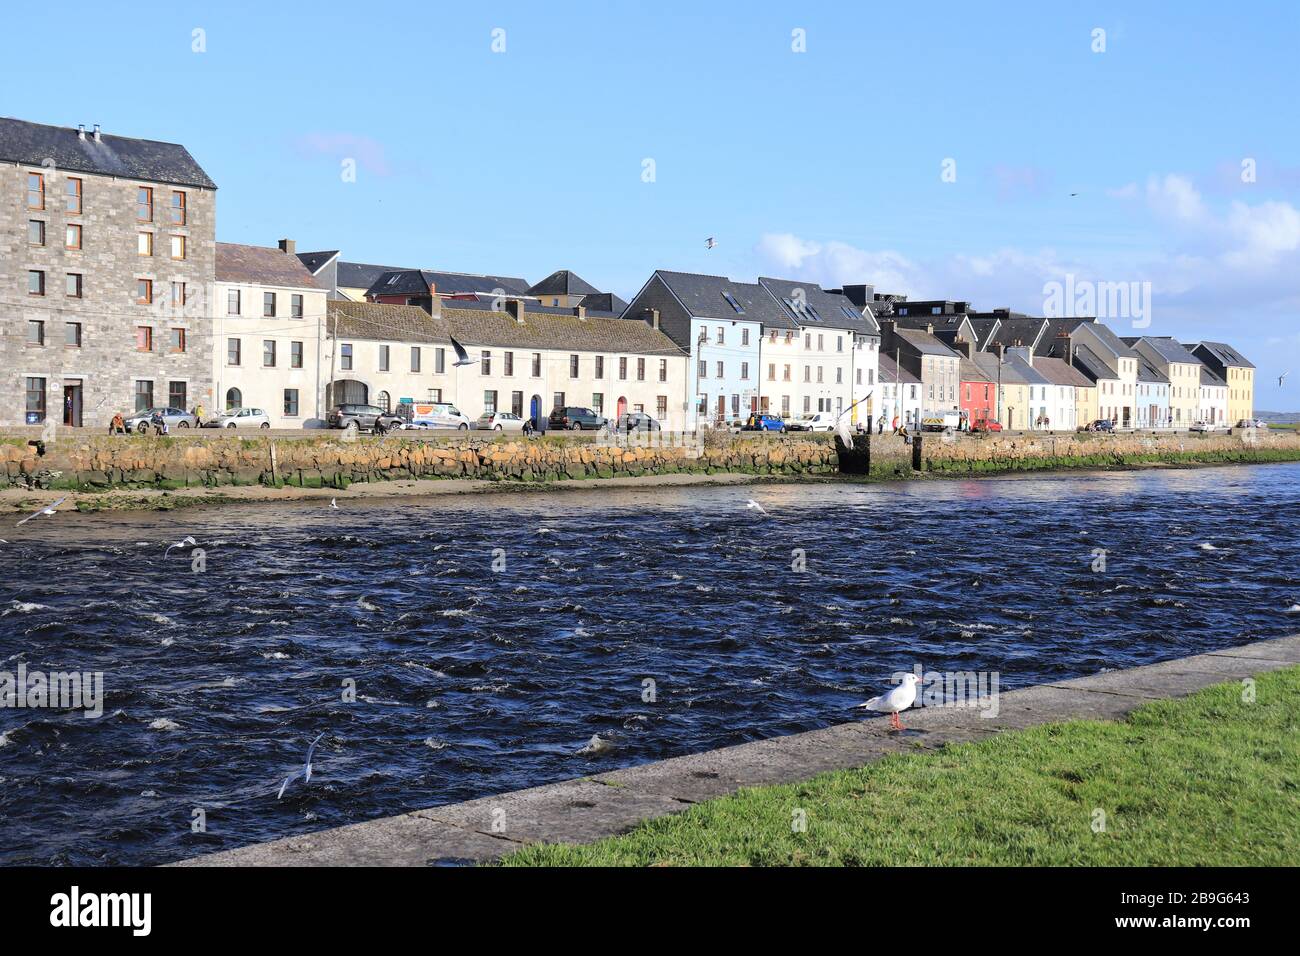 View of the Long Walk, Galway city from across the river on a sunny day, sea gull flying, one sea gull standing at foreground Stock Photo